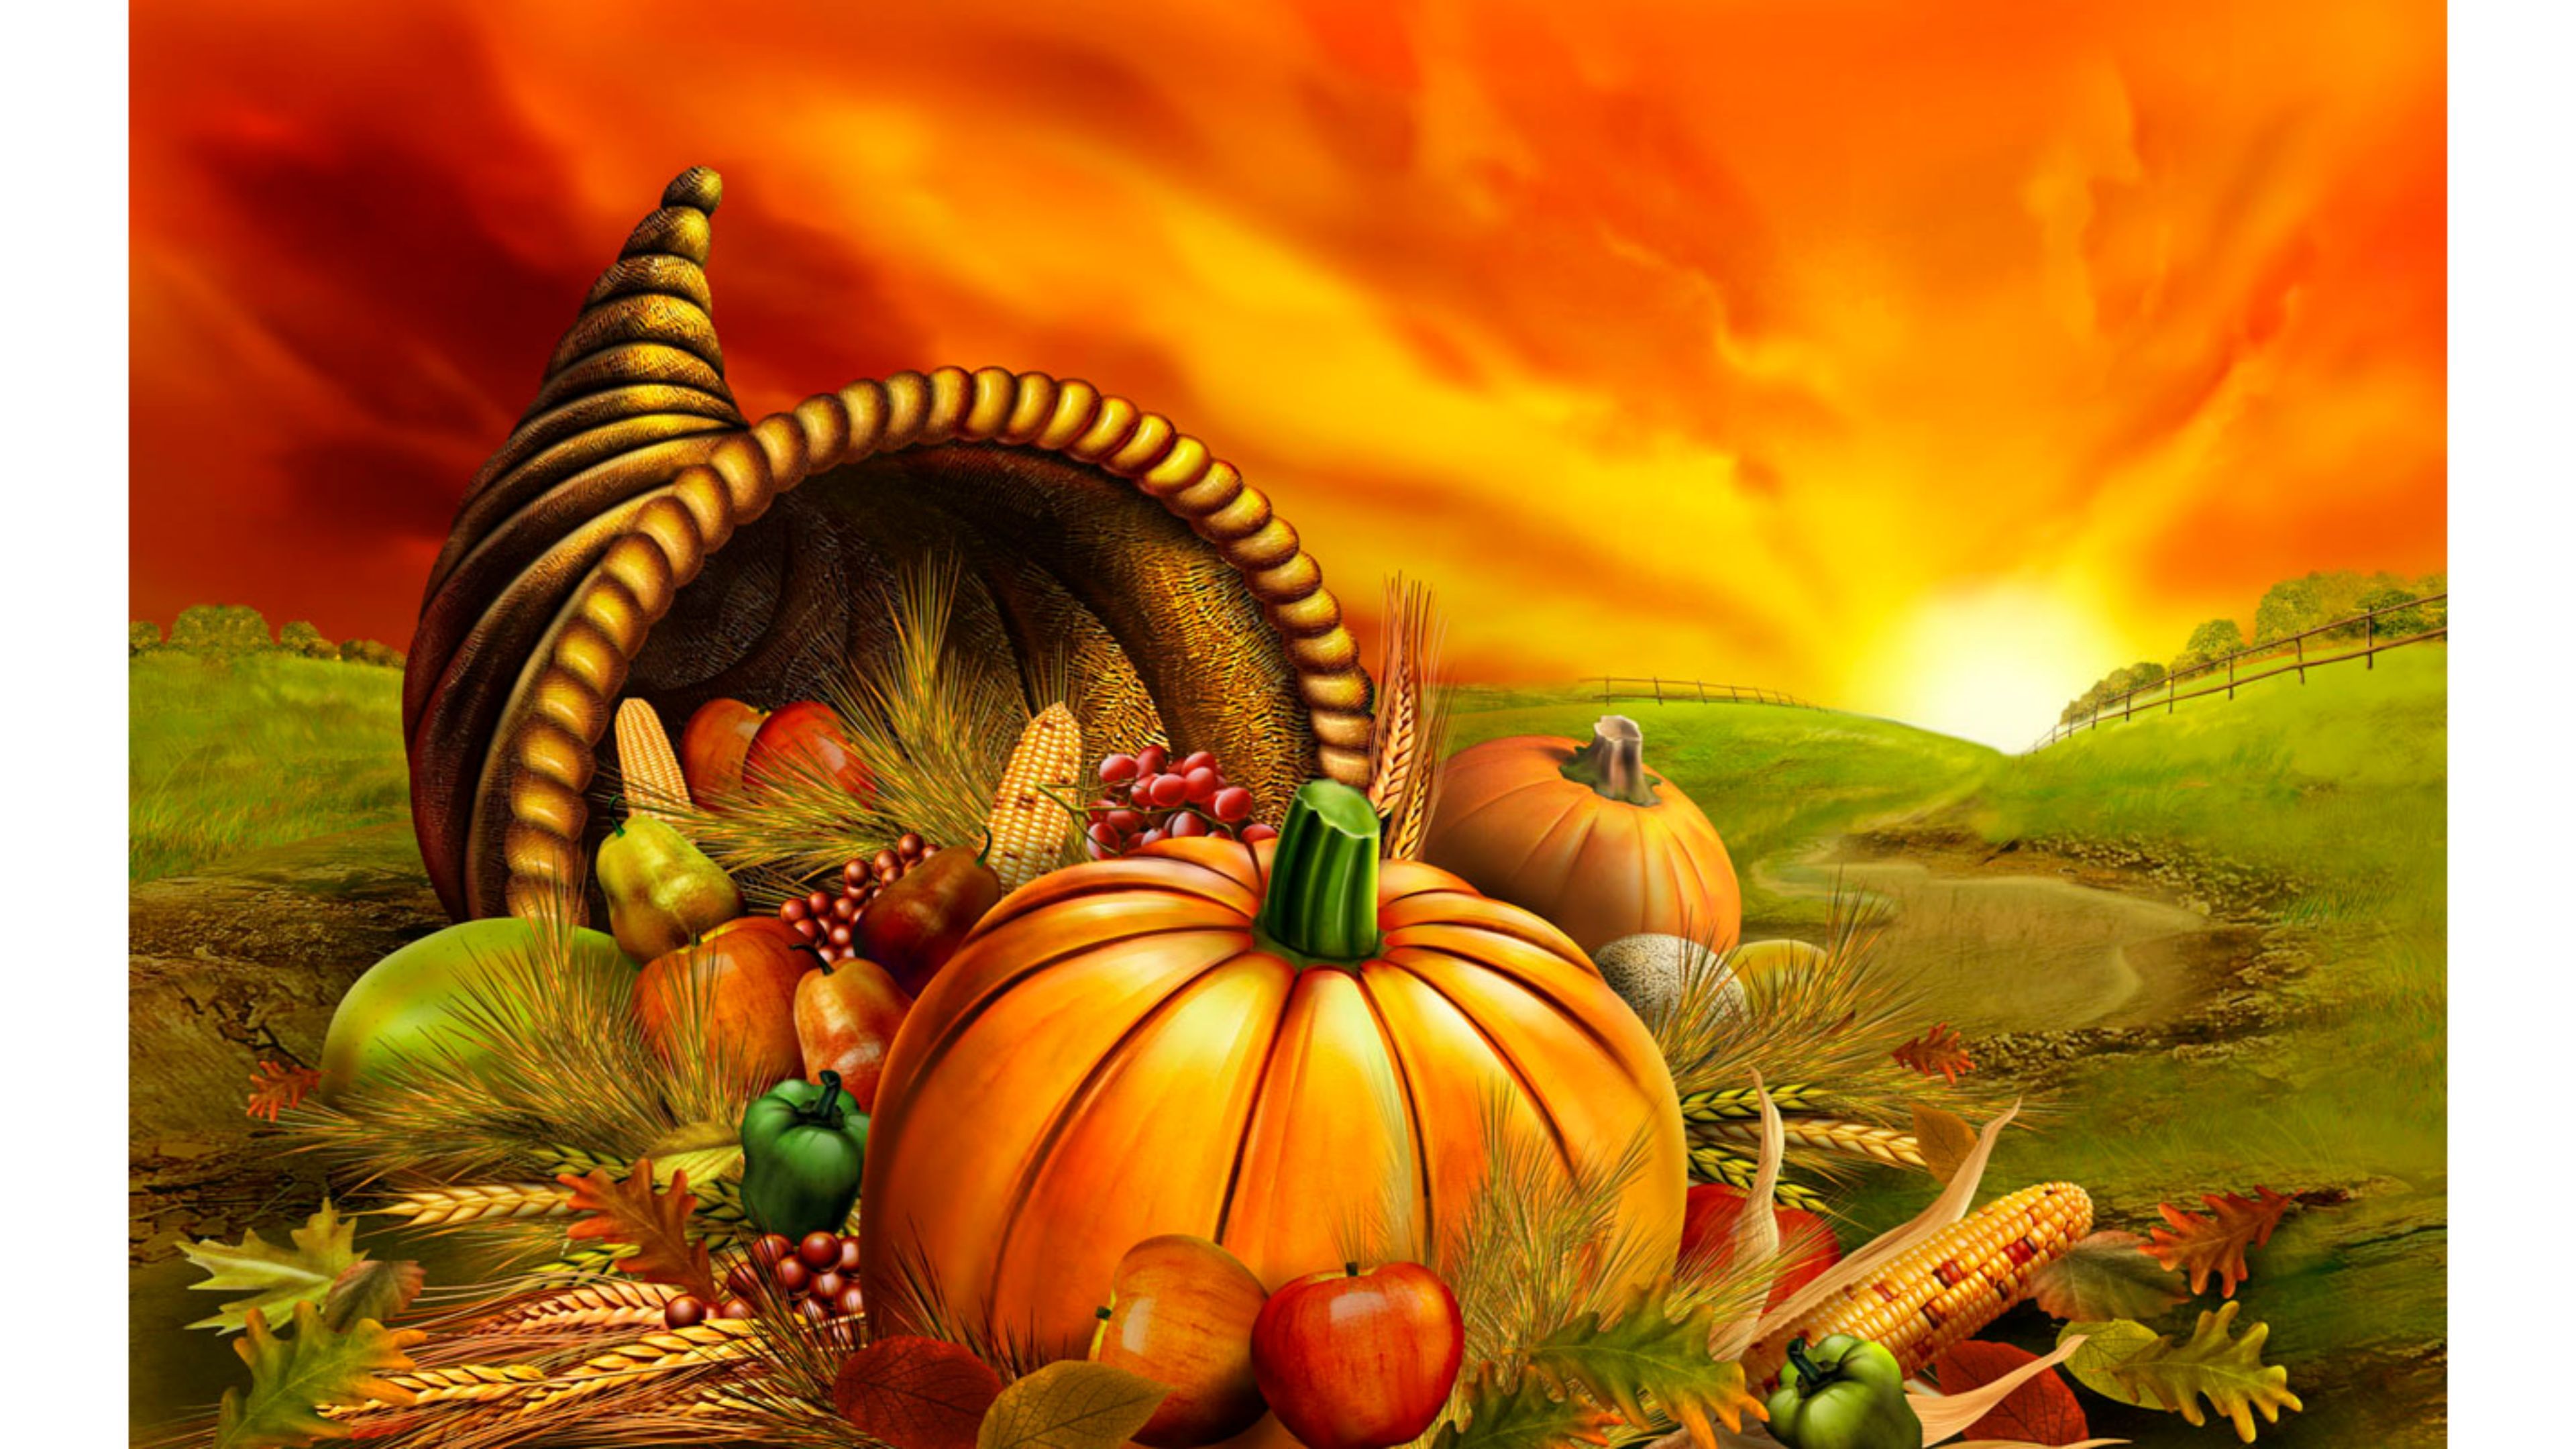 Thanksgiving 4K wallpaper for your desktop or mobile screen free and easy to download